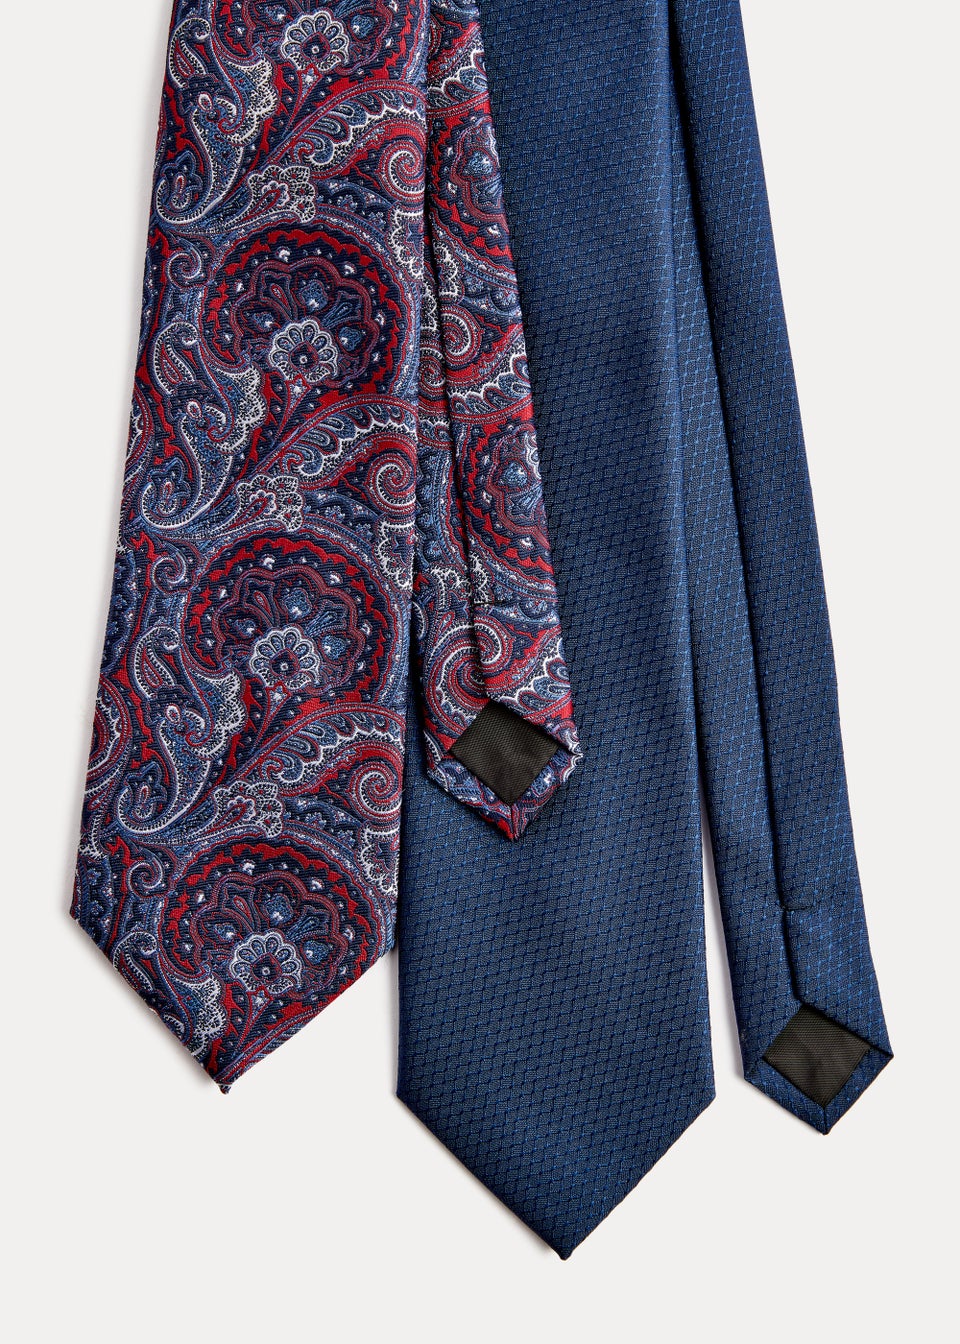 Taylor & Wright 2 Pack Navy & Red Ties